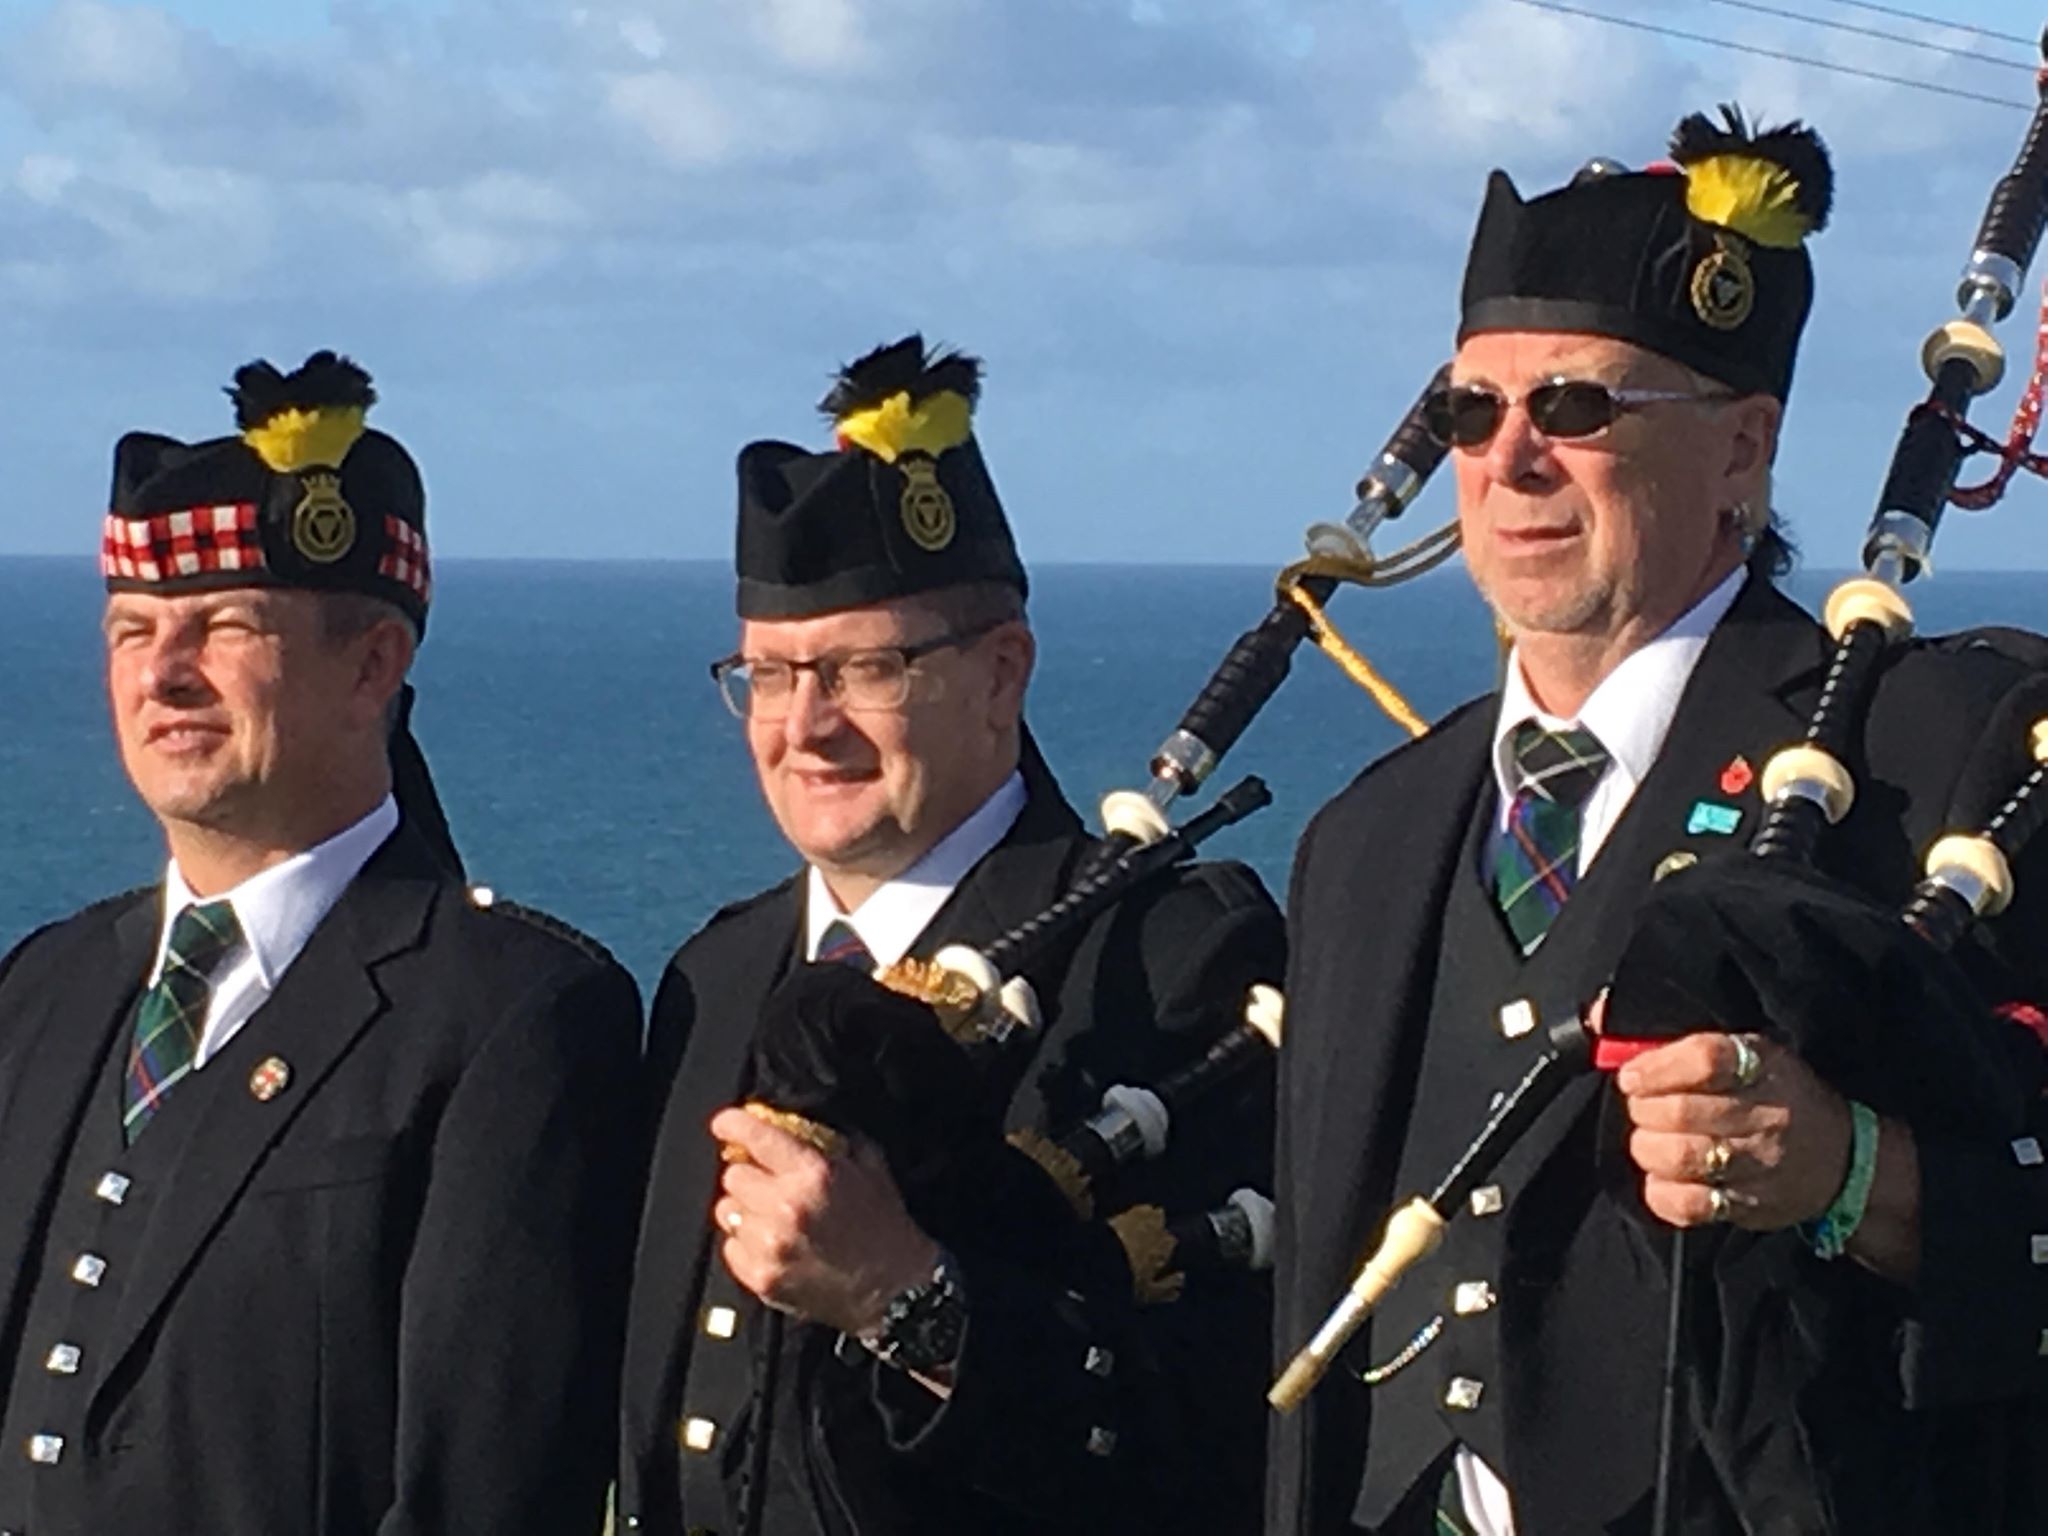 Kernow Pipes and Drums at Port Isaac carnival 2019